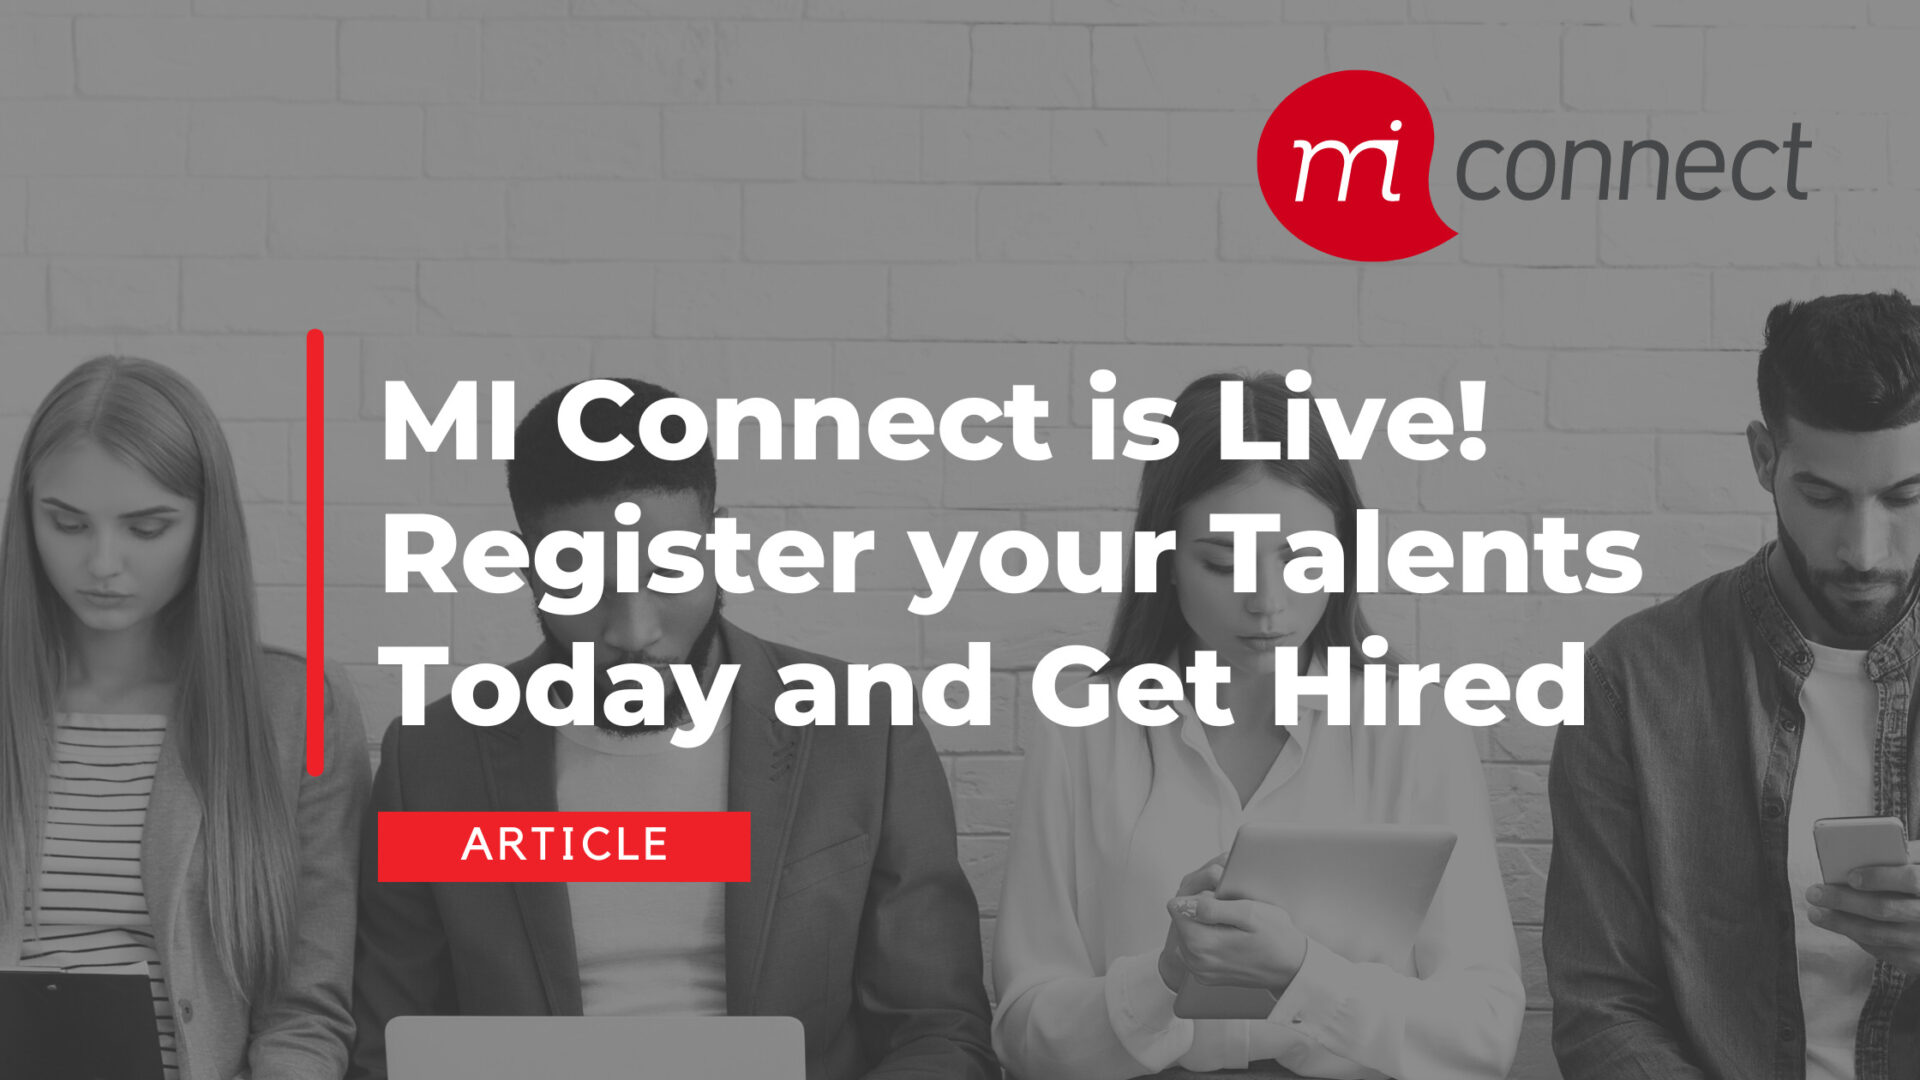 MI Connect is Live! Register your Talents Today and Get Hired